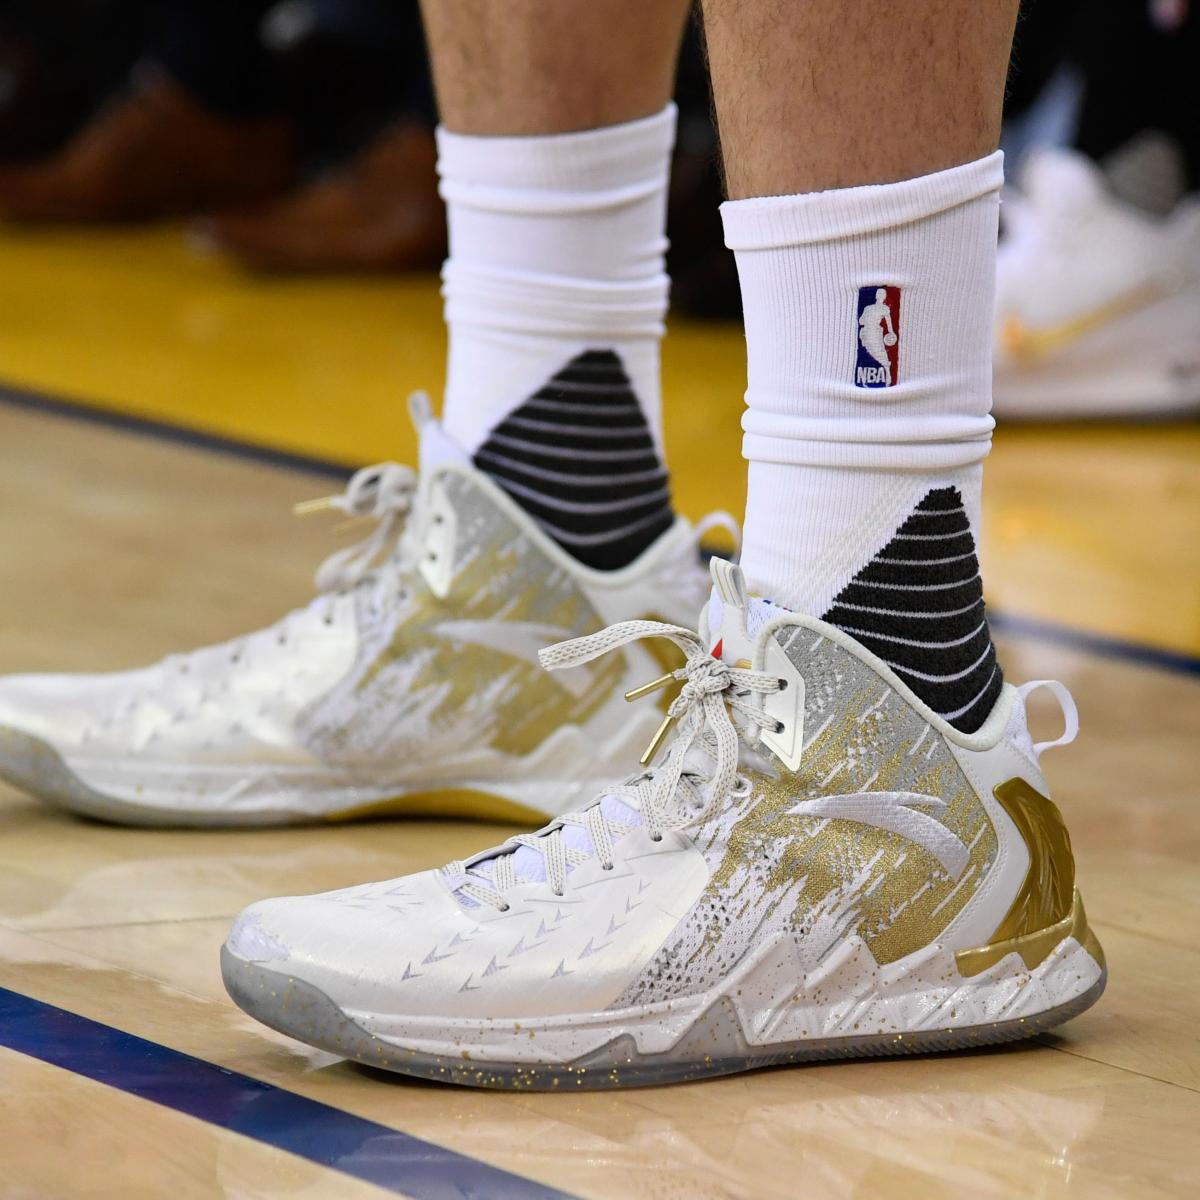 Klay Thompson Chose Anta Over Nike and Addidas So He Could 'Be the